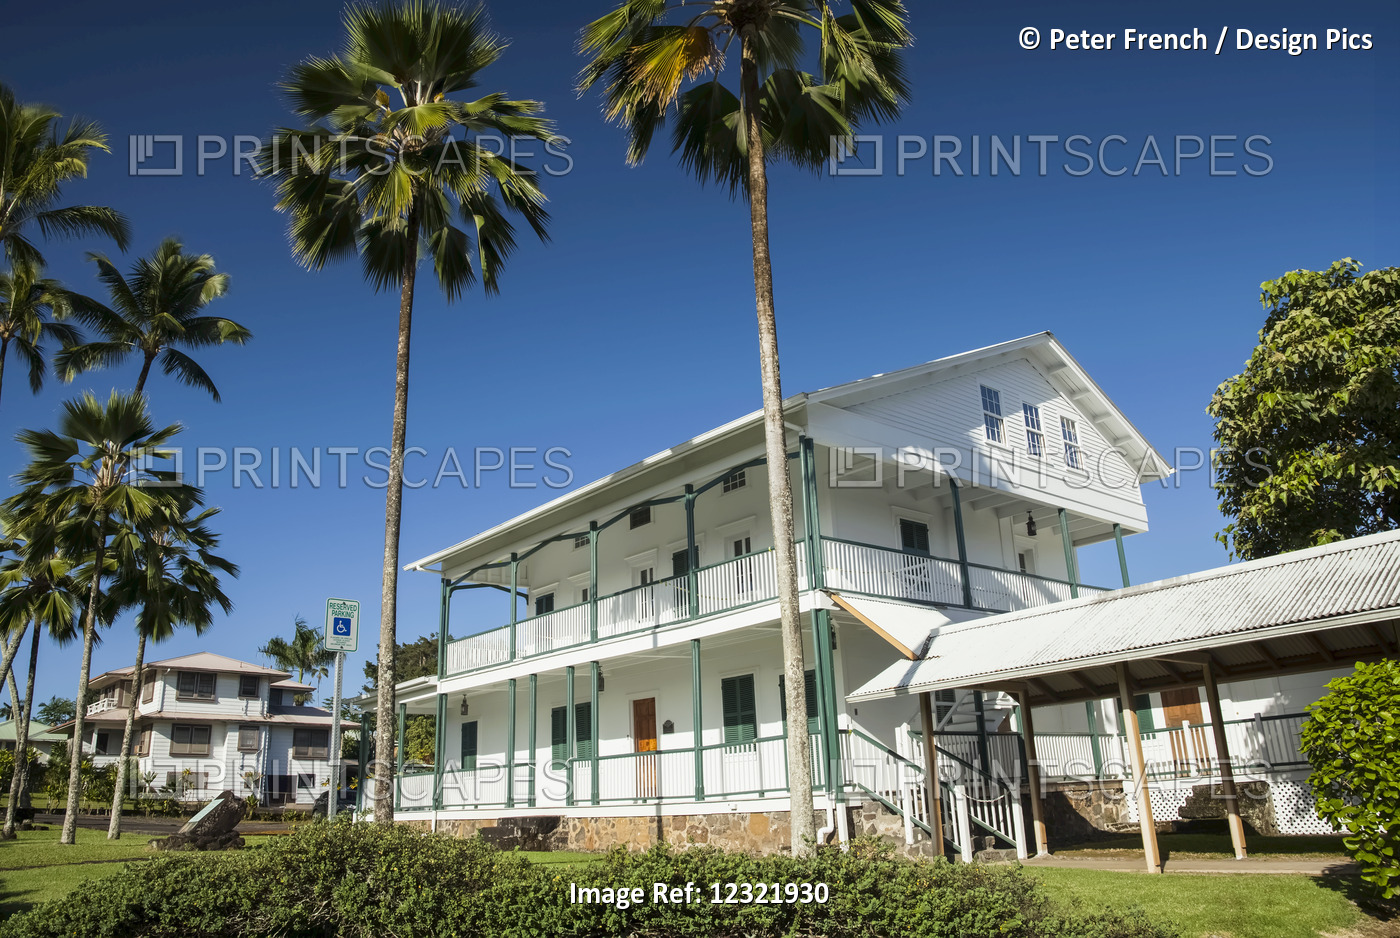 Royal Palms, Lyman Museum, Old And New Sections Of Lyman Museum, Downtown Hilo; ...